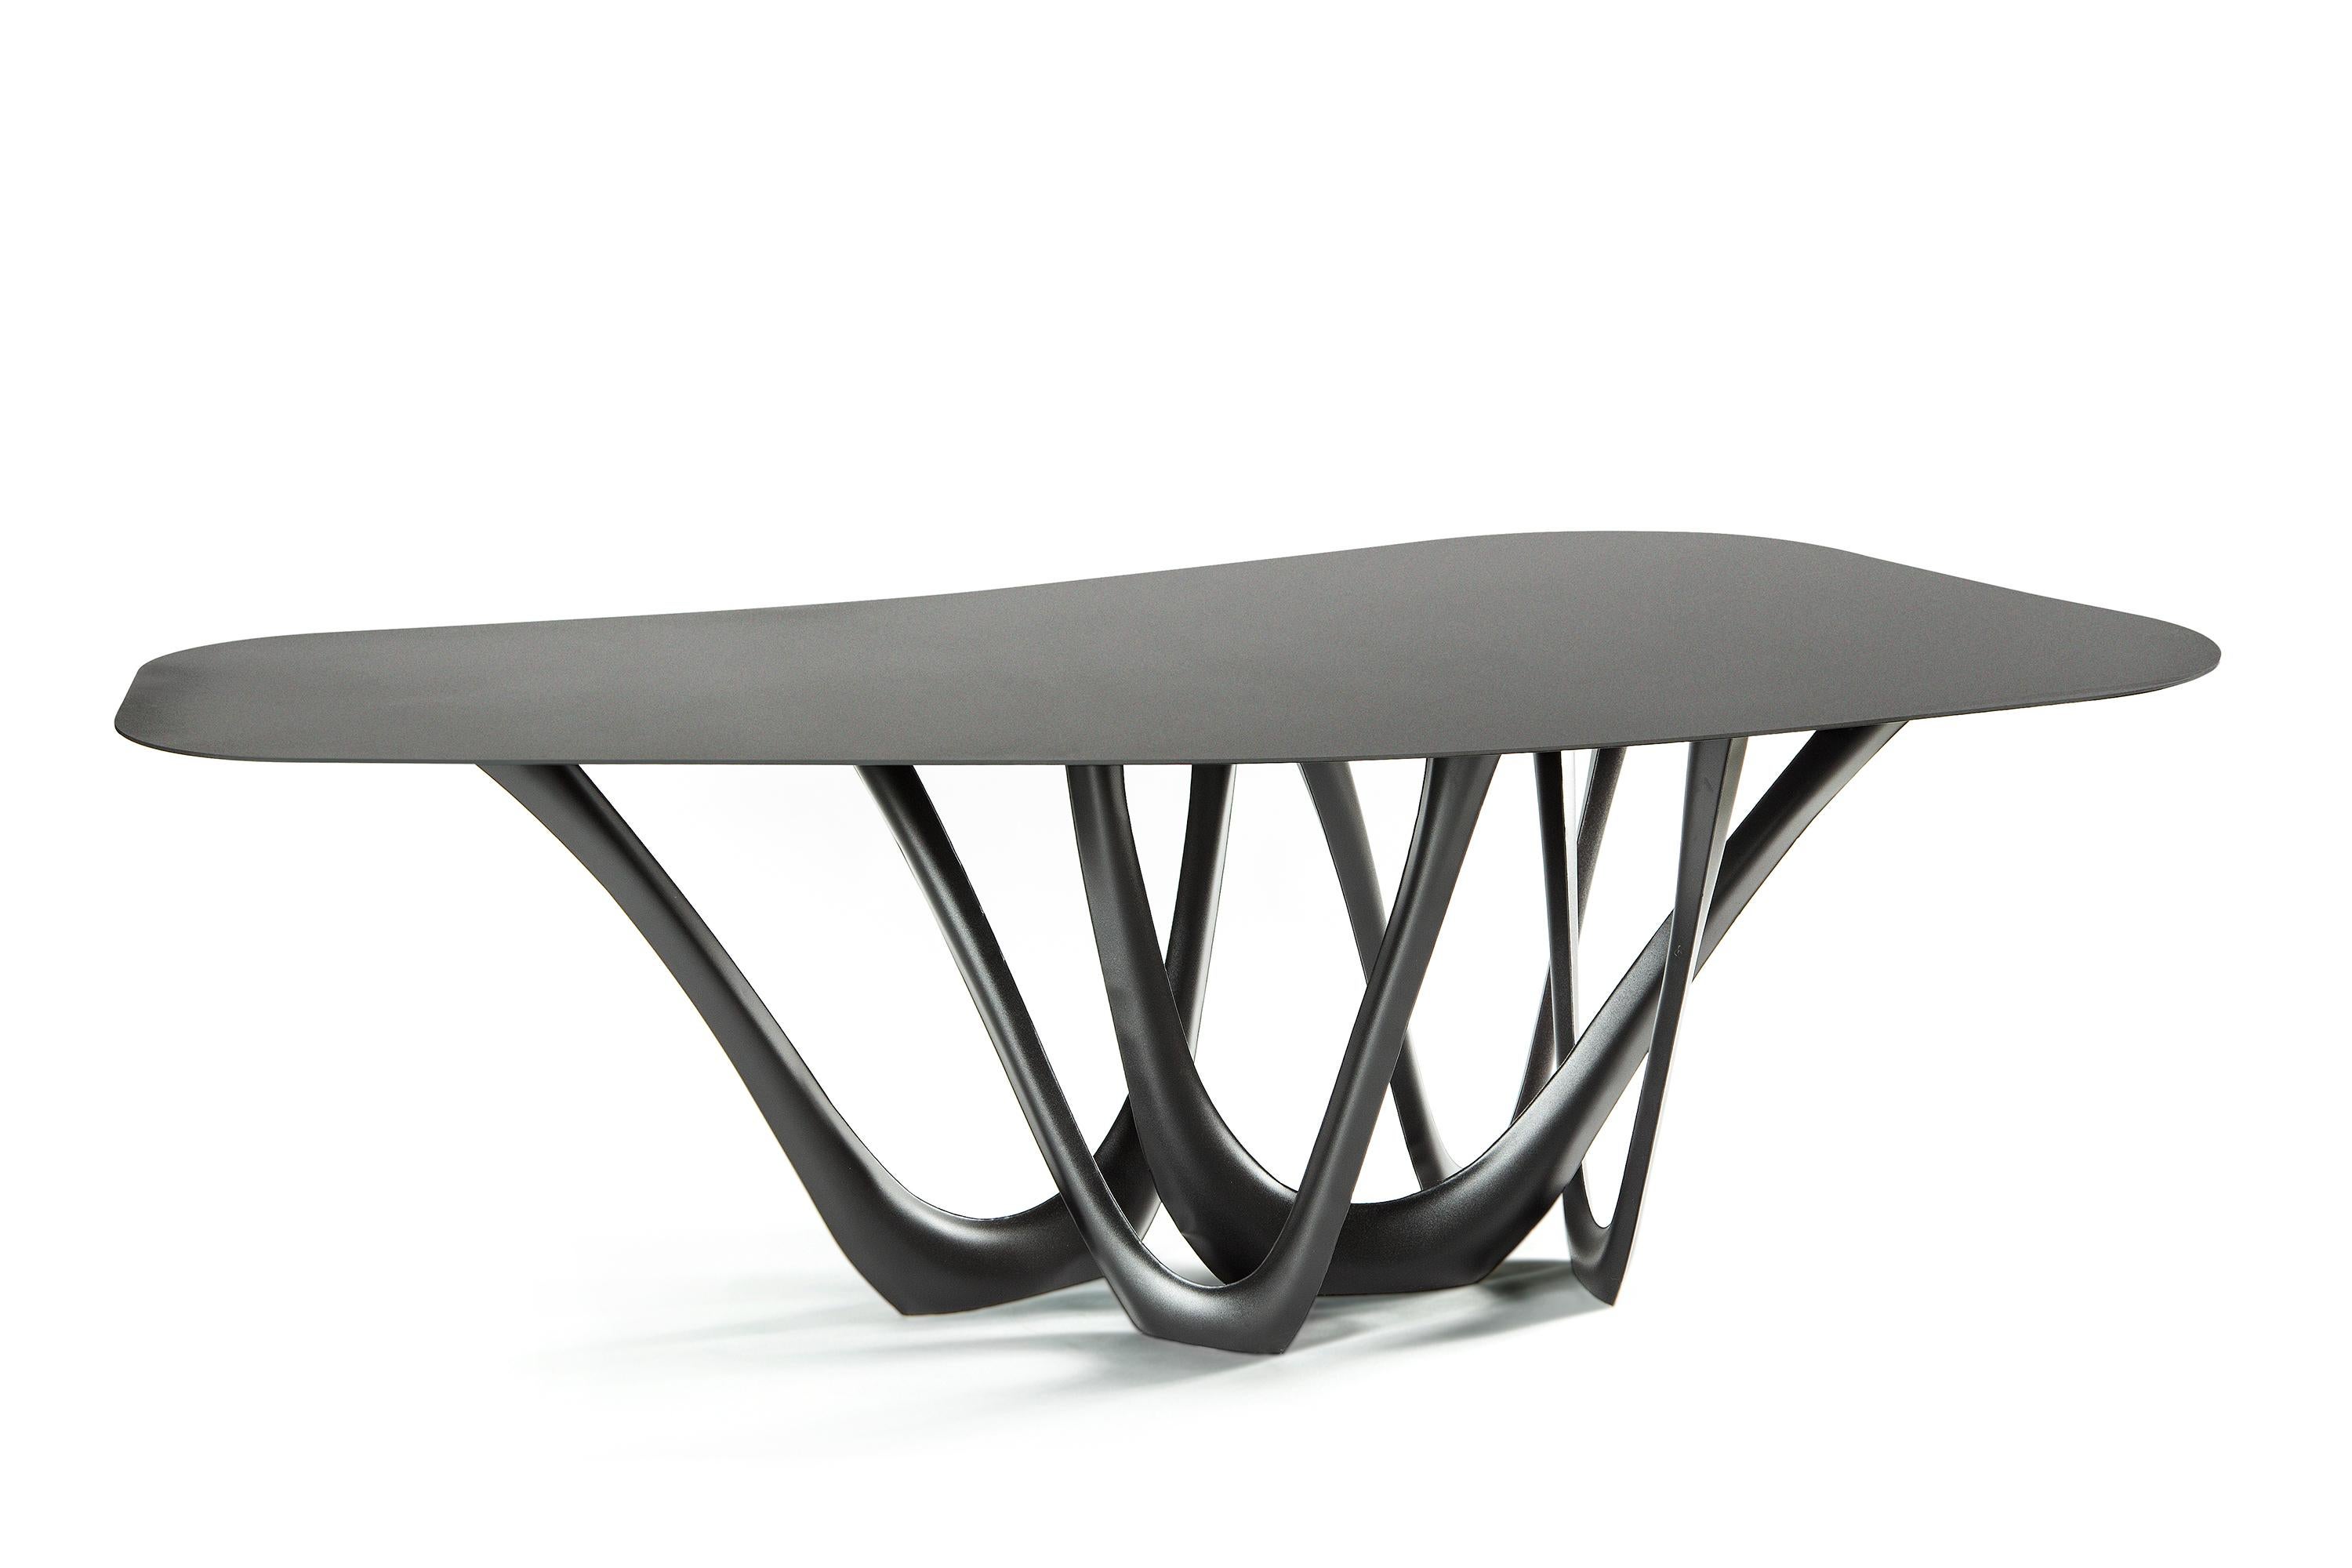 Powder-Coated Concrete Grey Steel Sculptural G-Table by Zieta For Sale